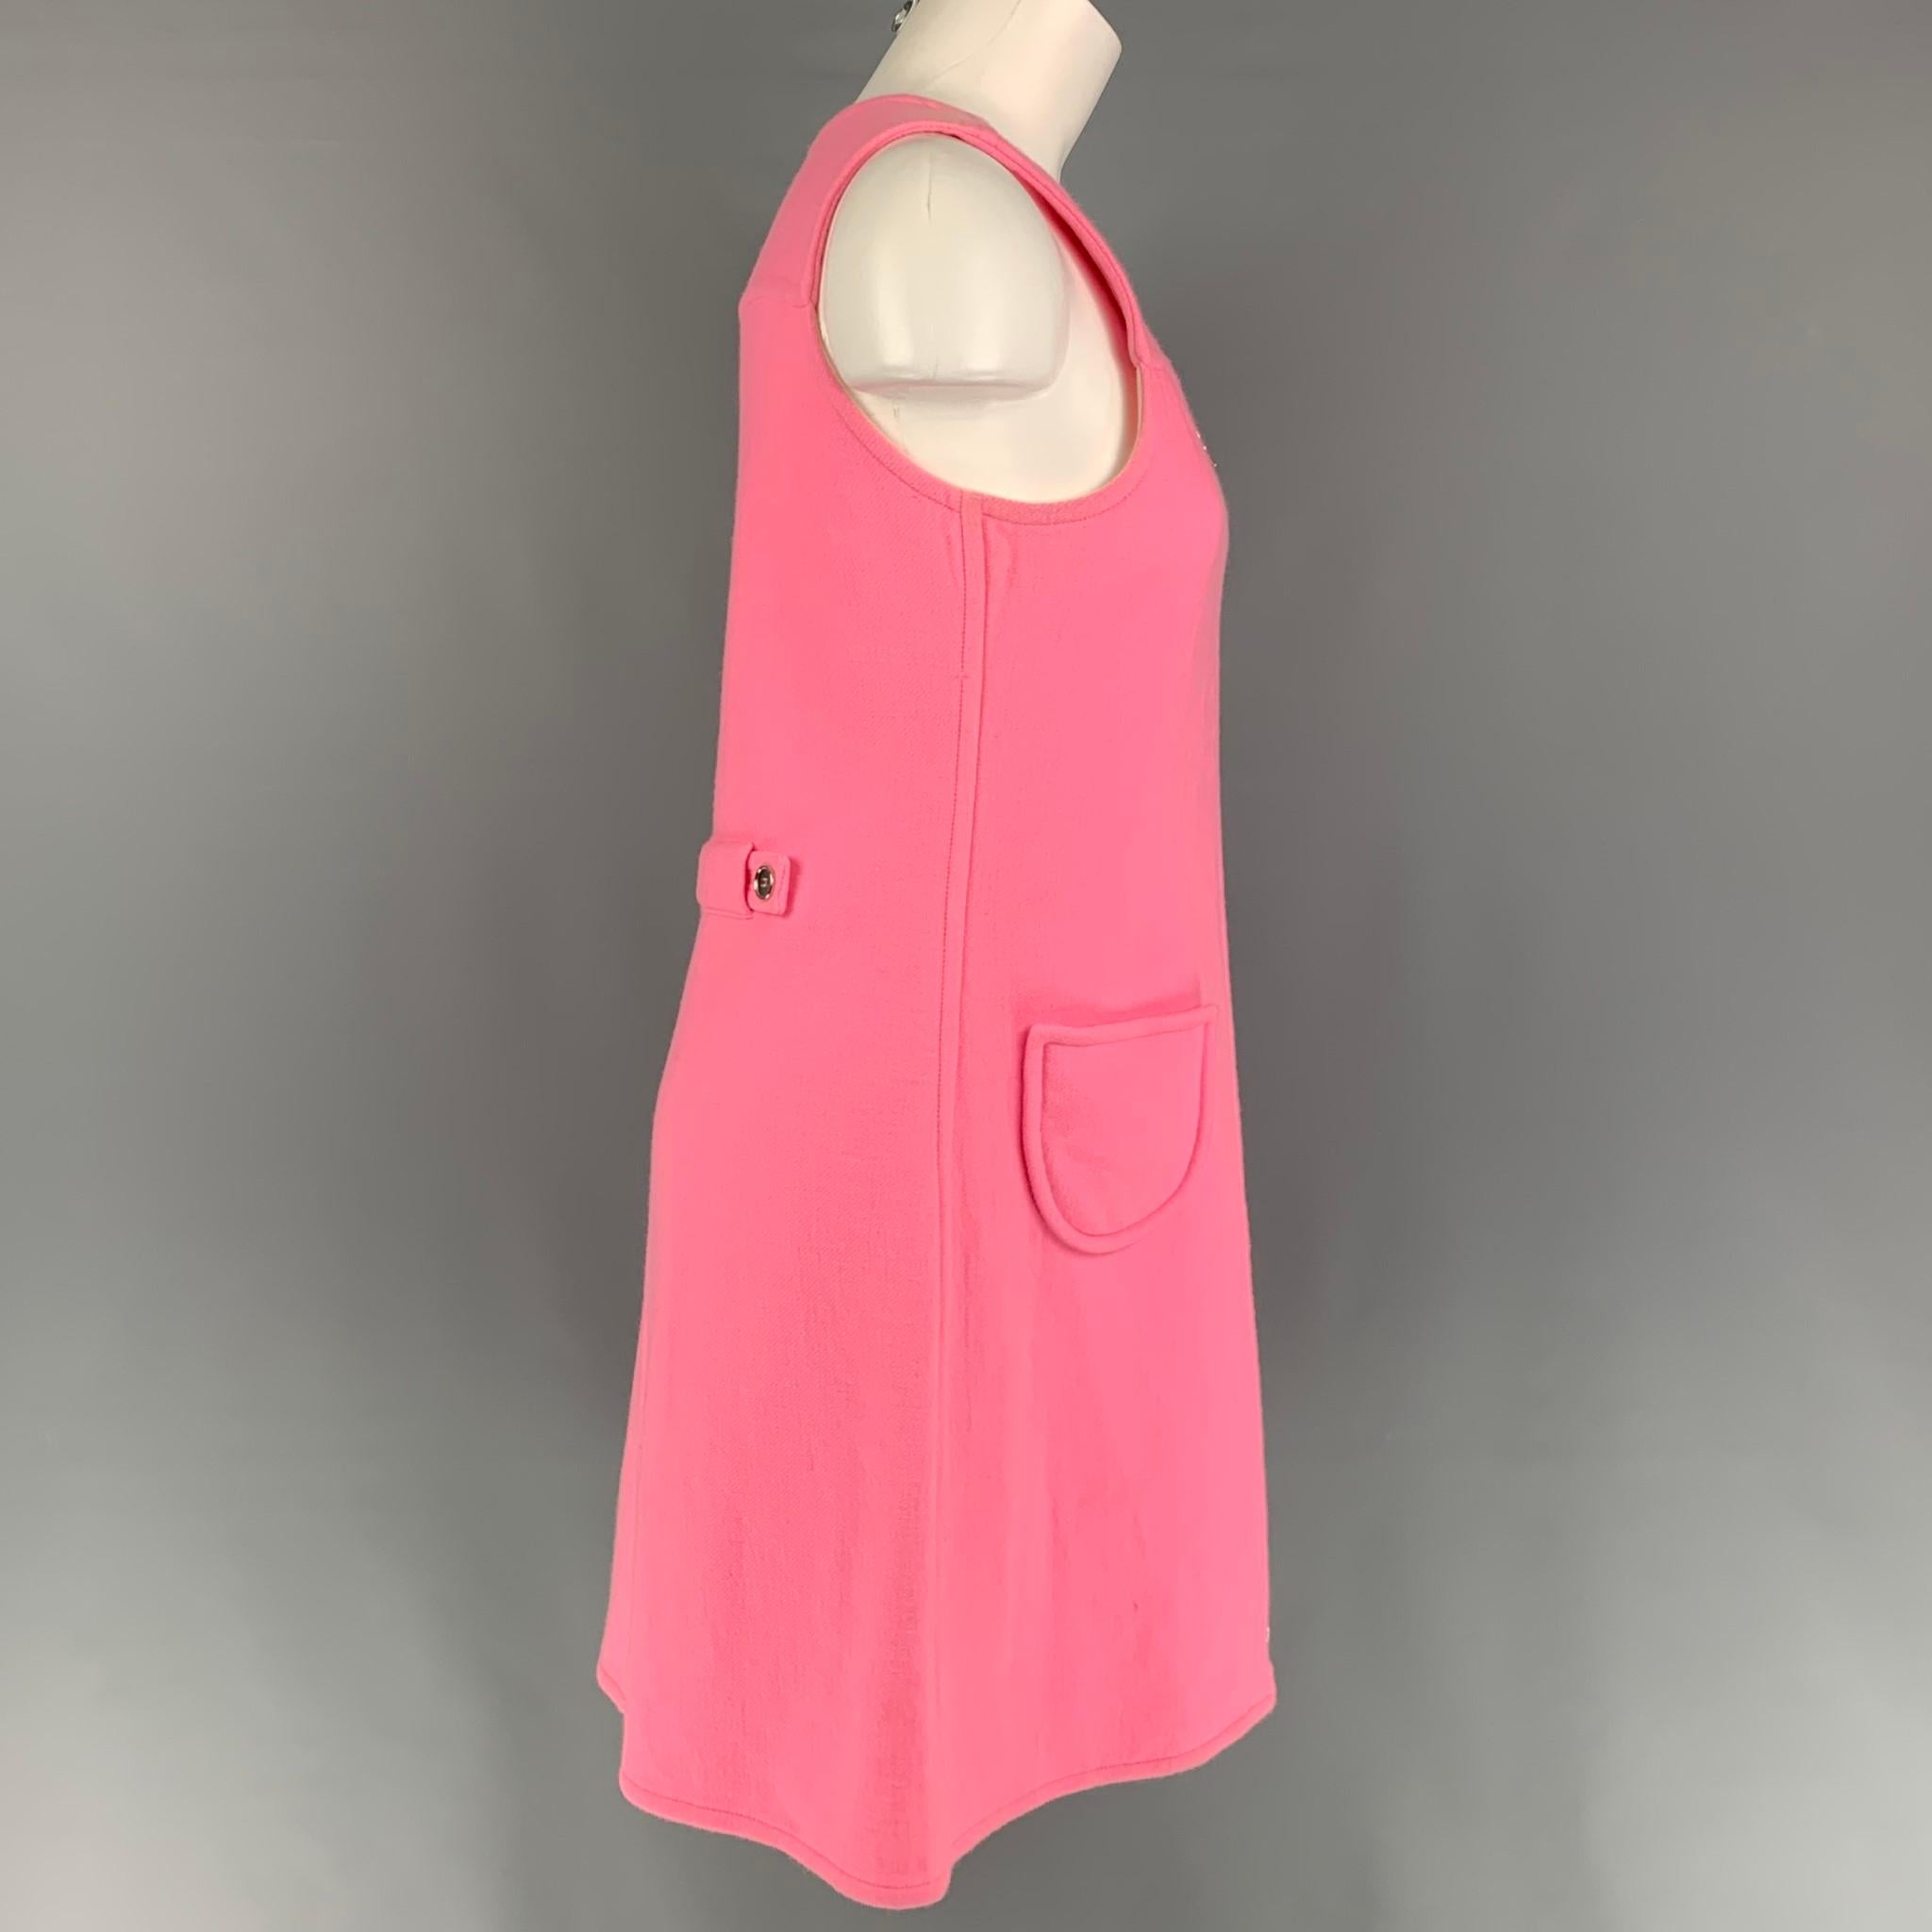 COURREGES dress comes in a pink wool / angora featuring a shift style, sleeveless, back strap detail, front pockets, and a front zip up closure. Made in France.

Very Good Pre-Owned Condition.
Marked: Size tag removed. 
Original Retail Price: